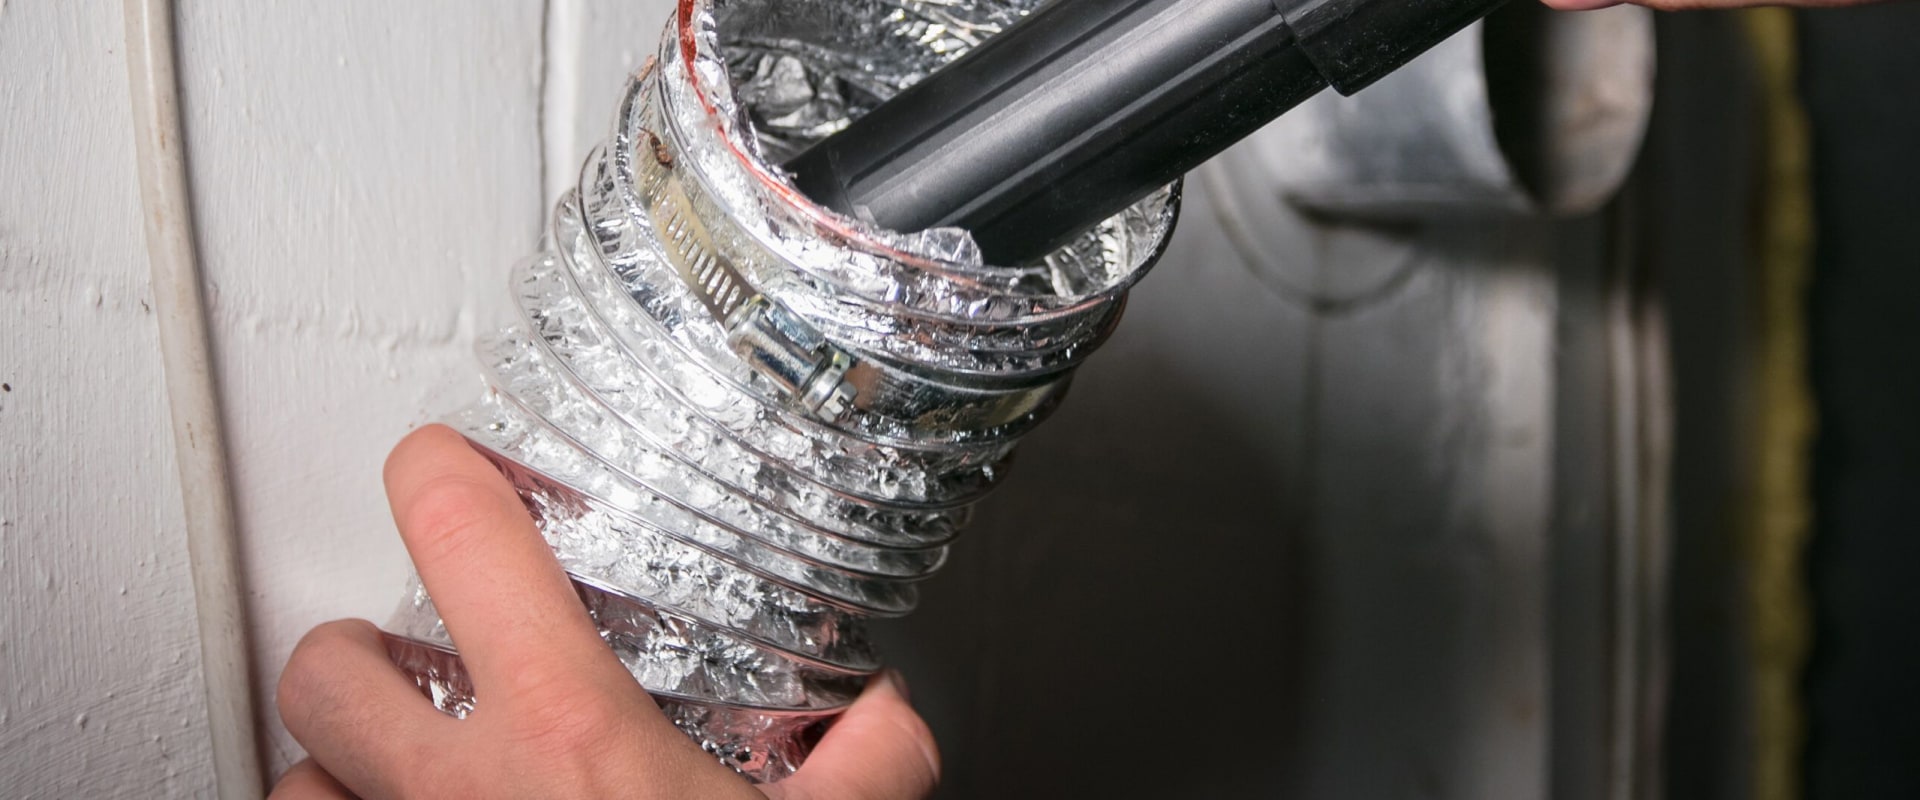 Dryer Vent Cleaning: An Overview